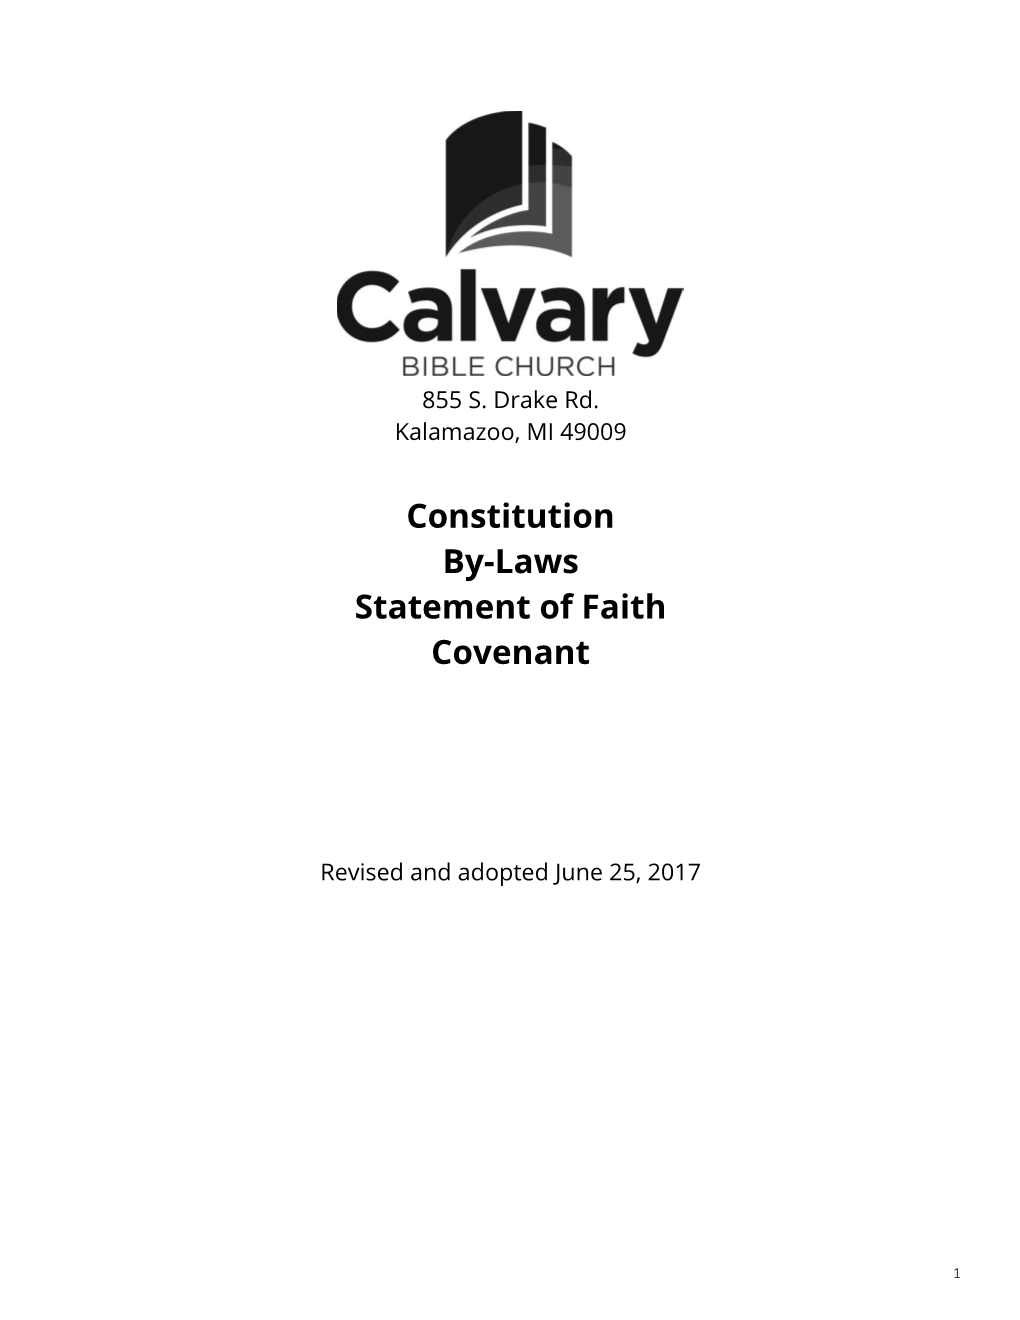 Read Our Complete Constitution & Statement of Faith